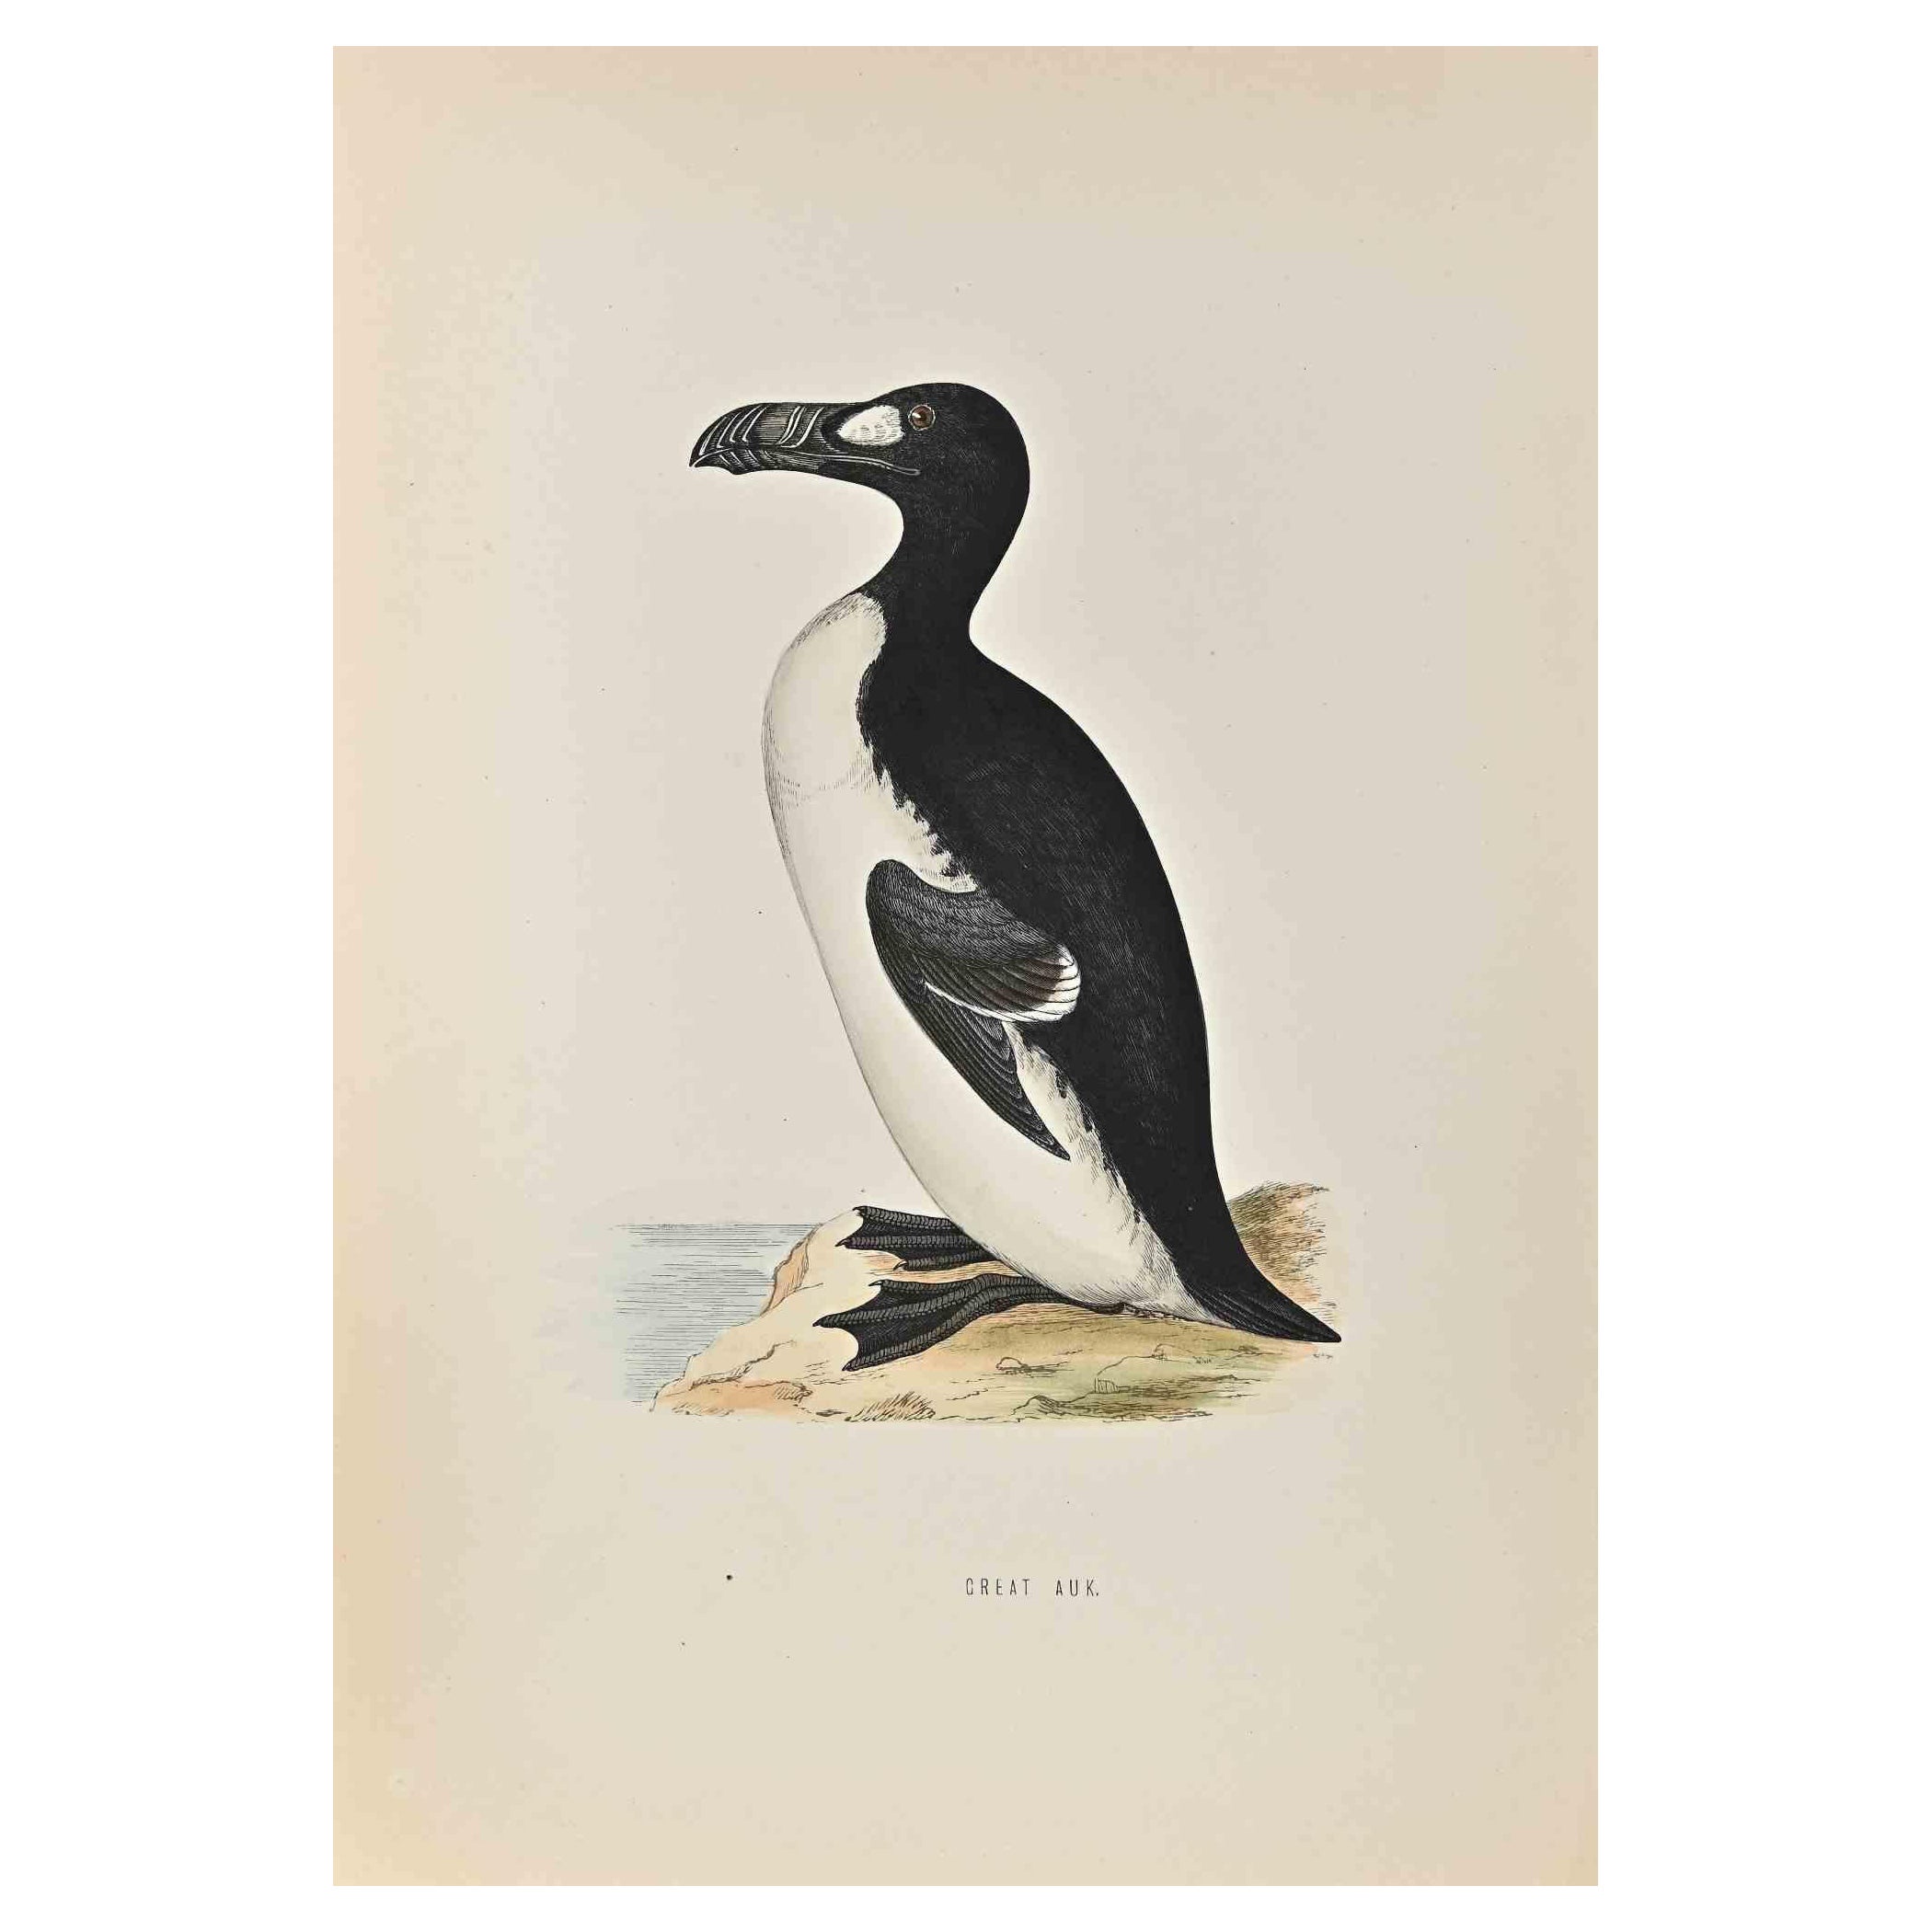 Great Auk is a modern artwork realized in 1870 by the British artist Alexander Francis Lydon (1836-1917) . 

Woodcut print, hand colored, published by London, Bell & Sons, 1870.  Name of the bird printed in plate. This work is part of a print suite